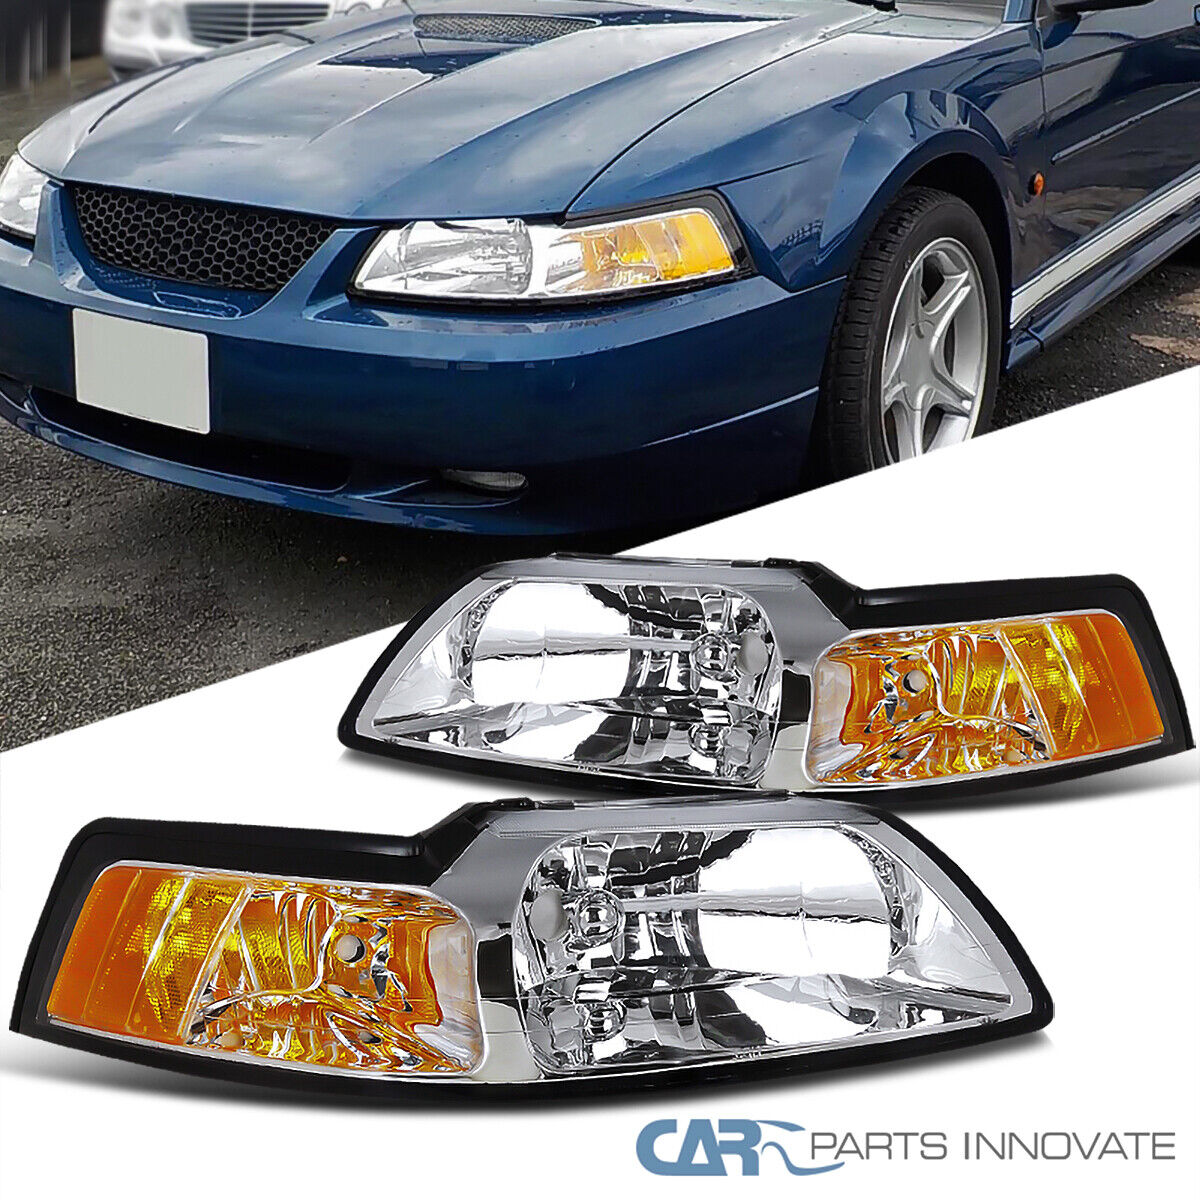 Chrome Headlights For 99-04 Ford Mustang GT+Amber Corner Turn Signal Lamps Set